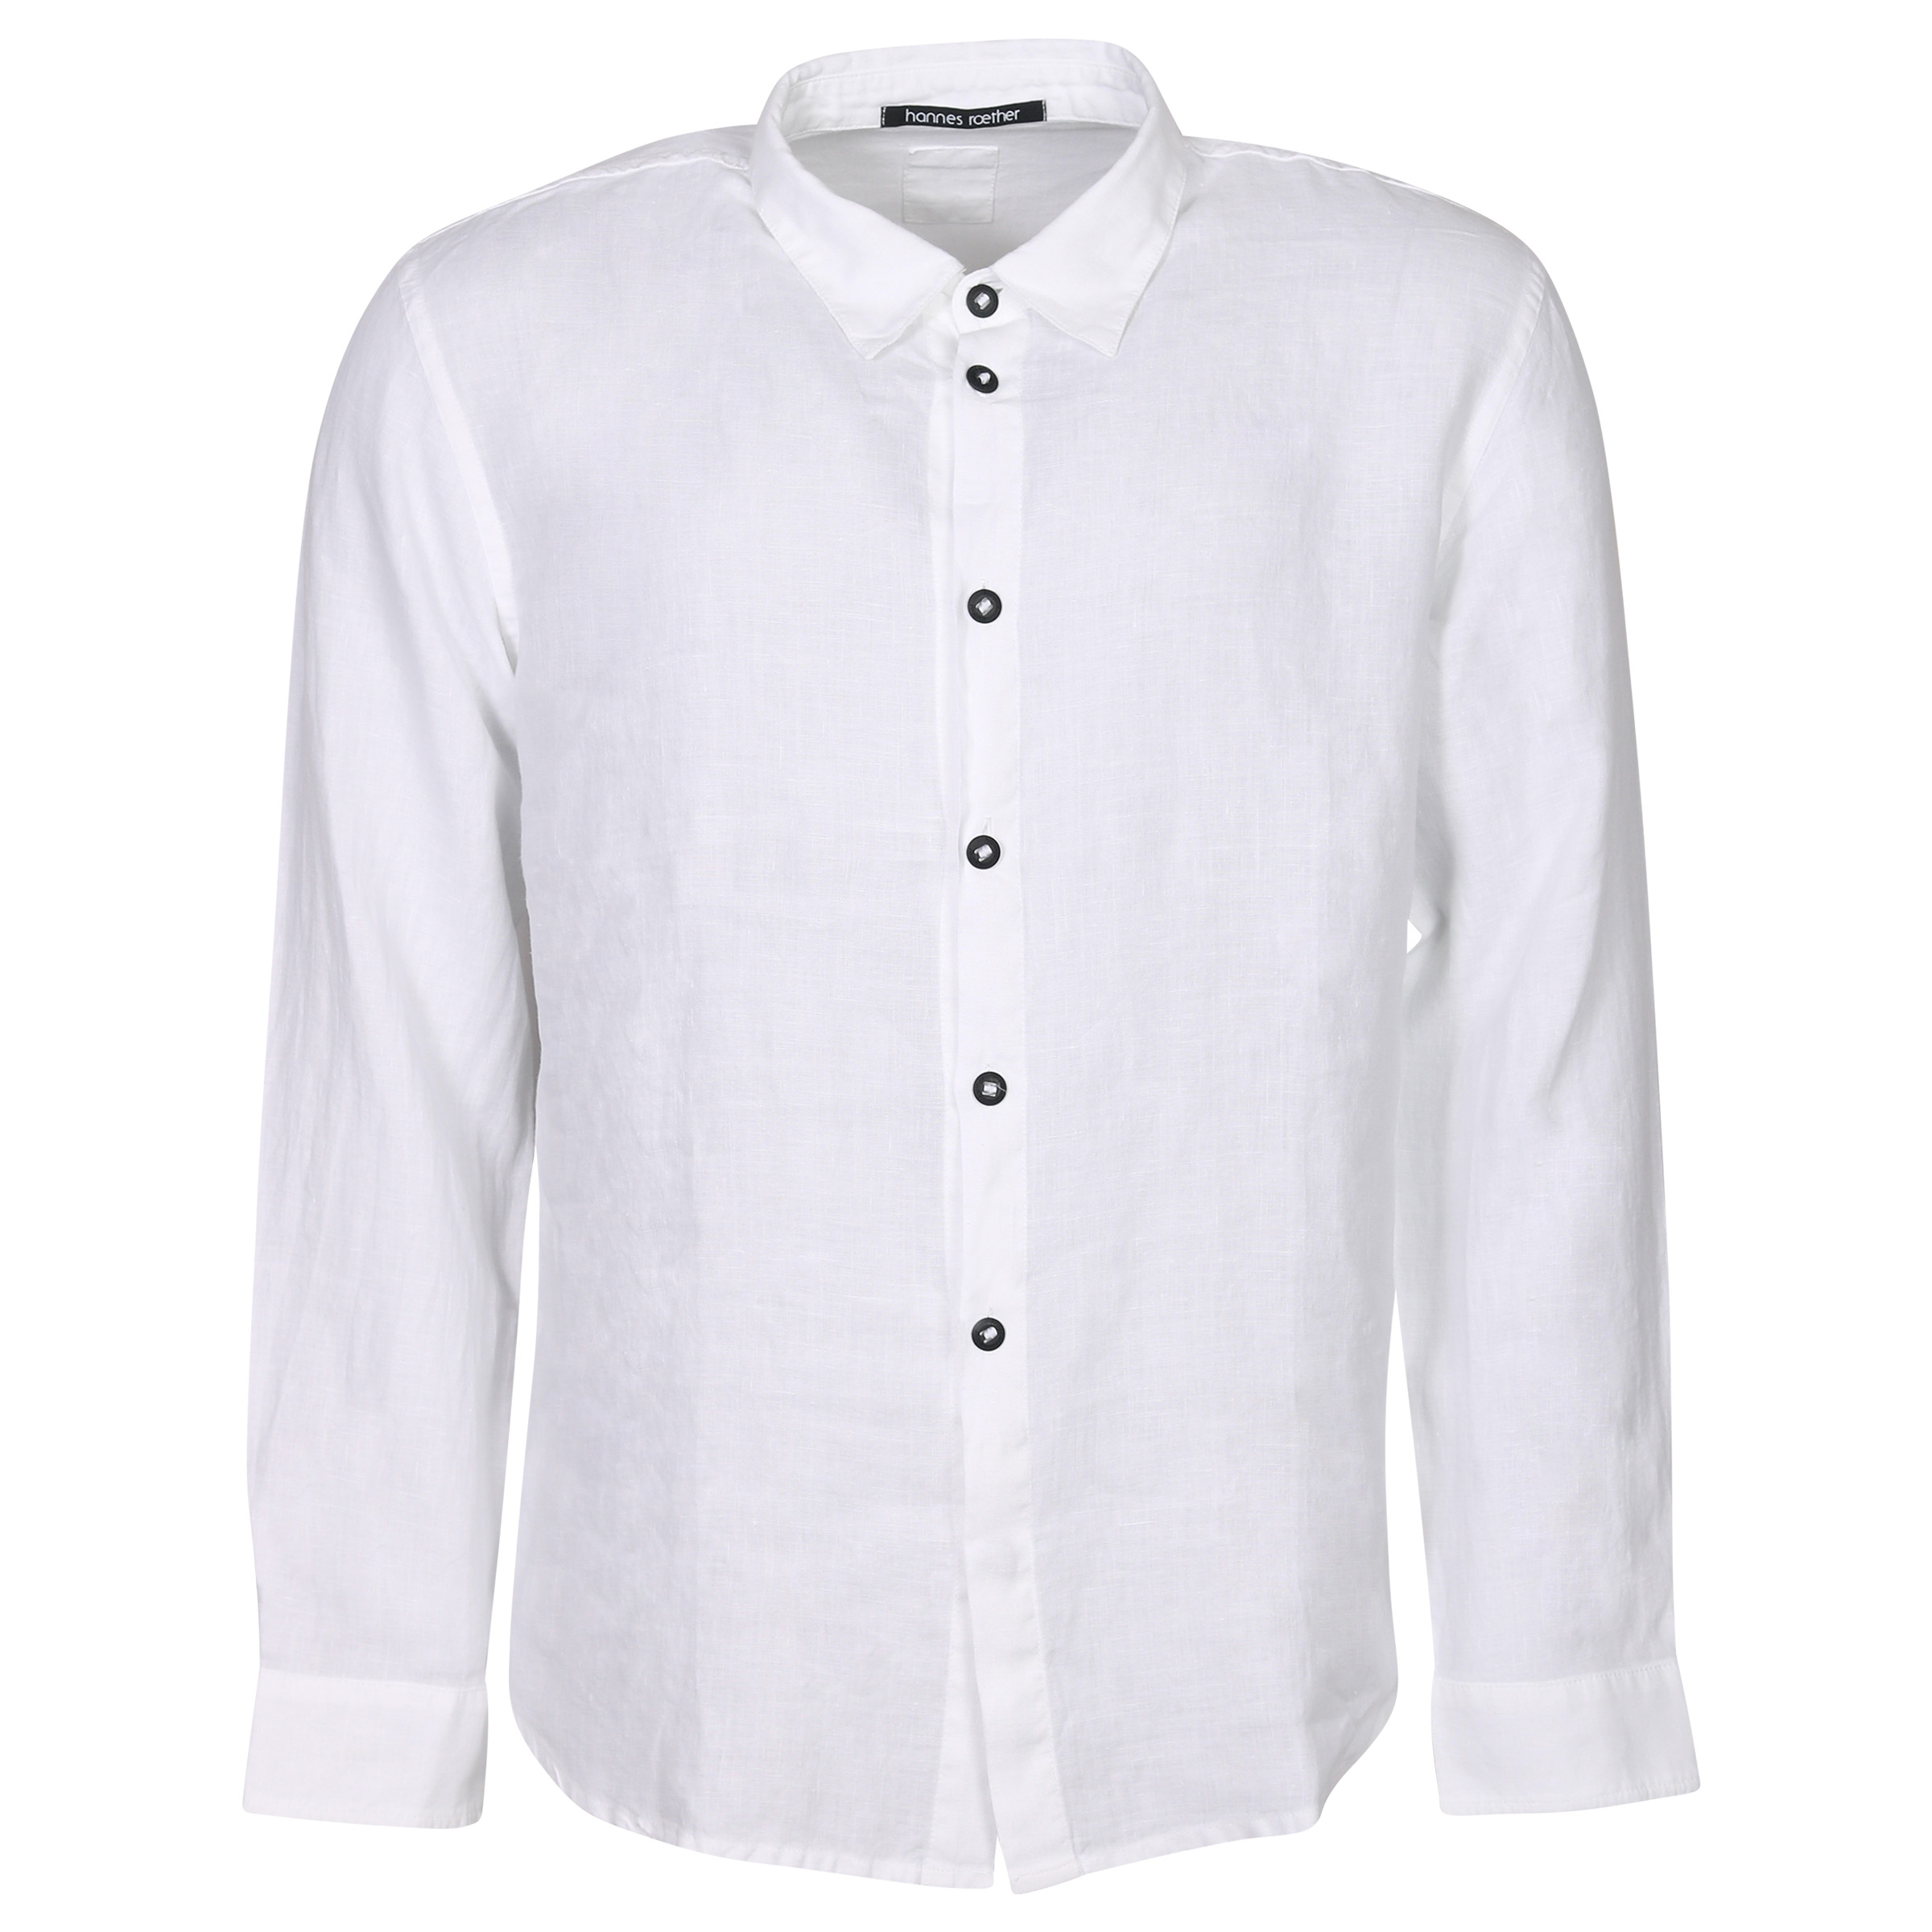 Hannes Roether Linen Shirt White